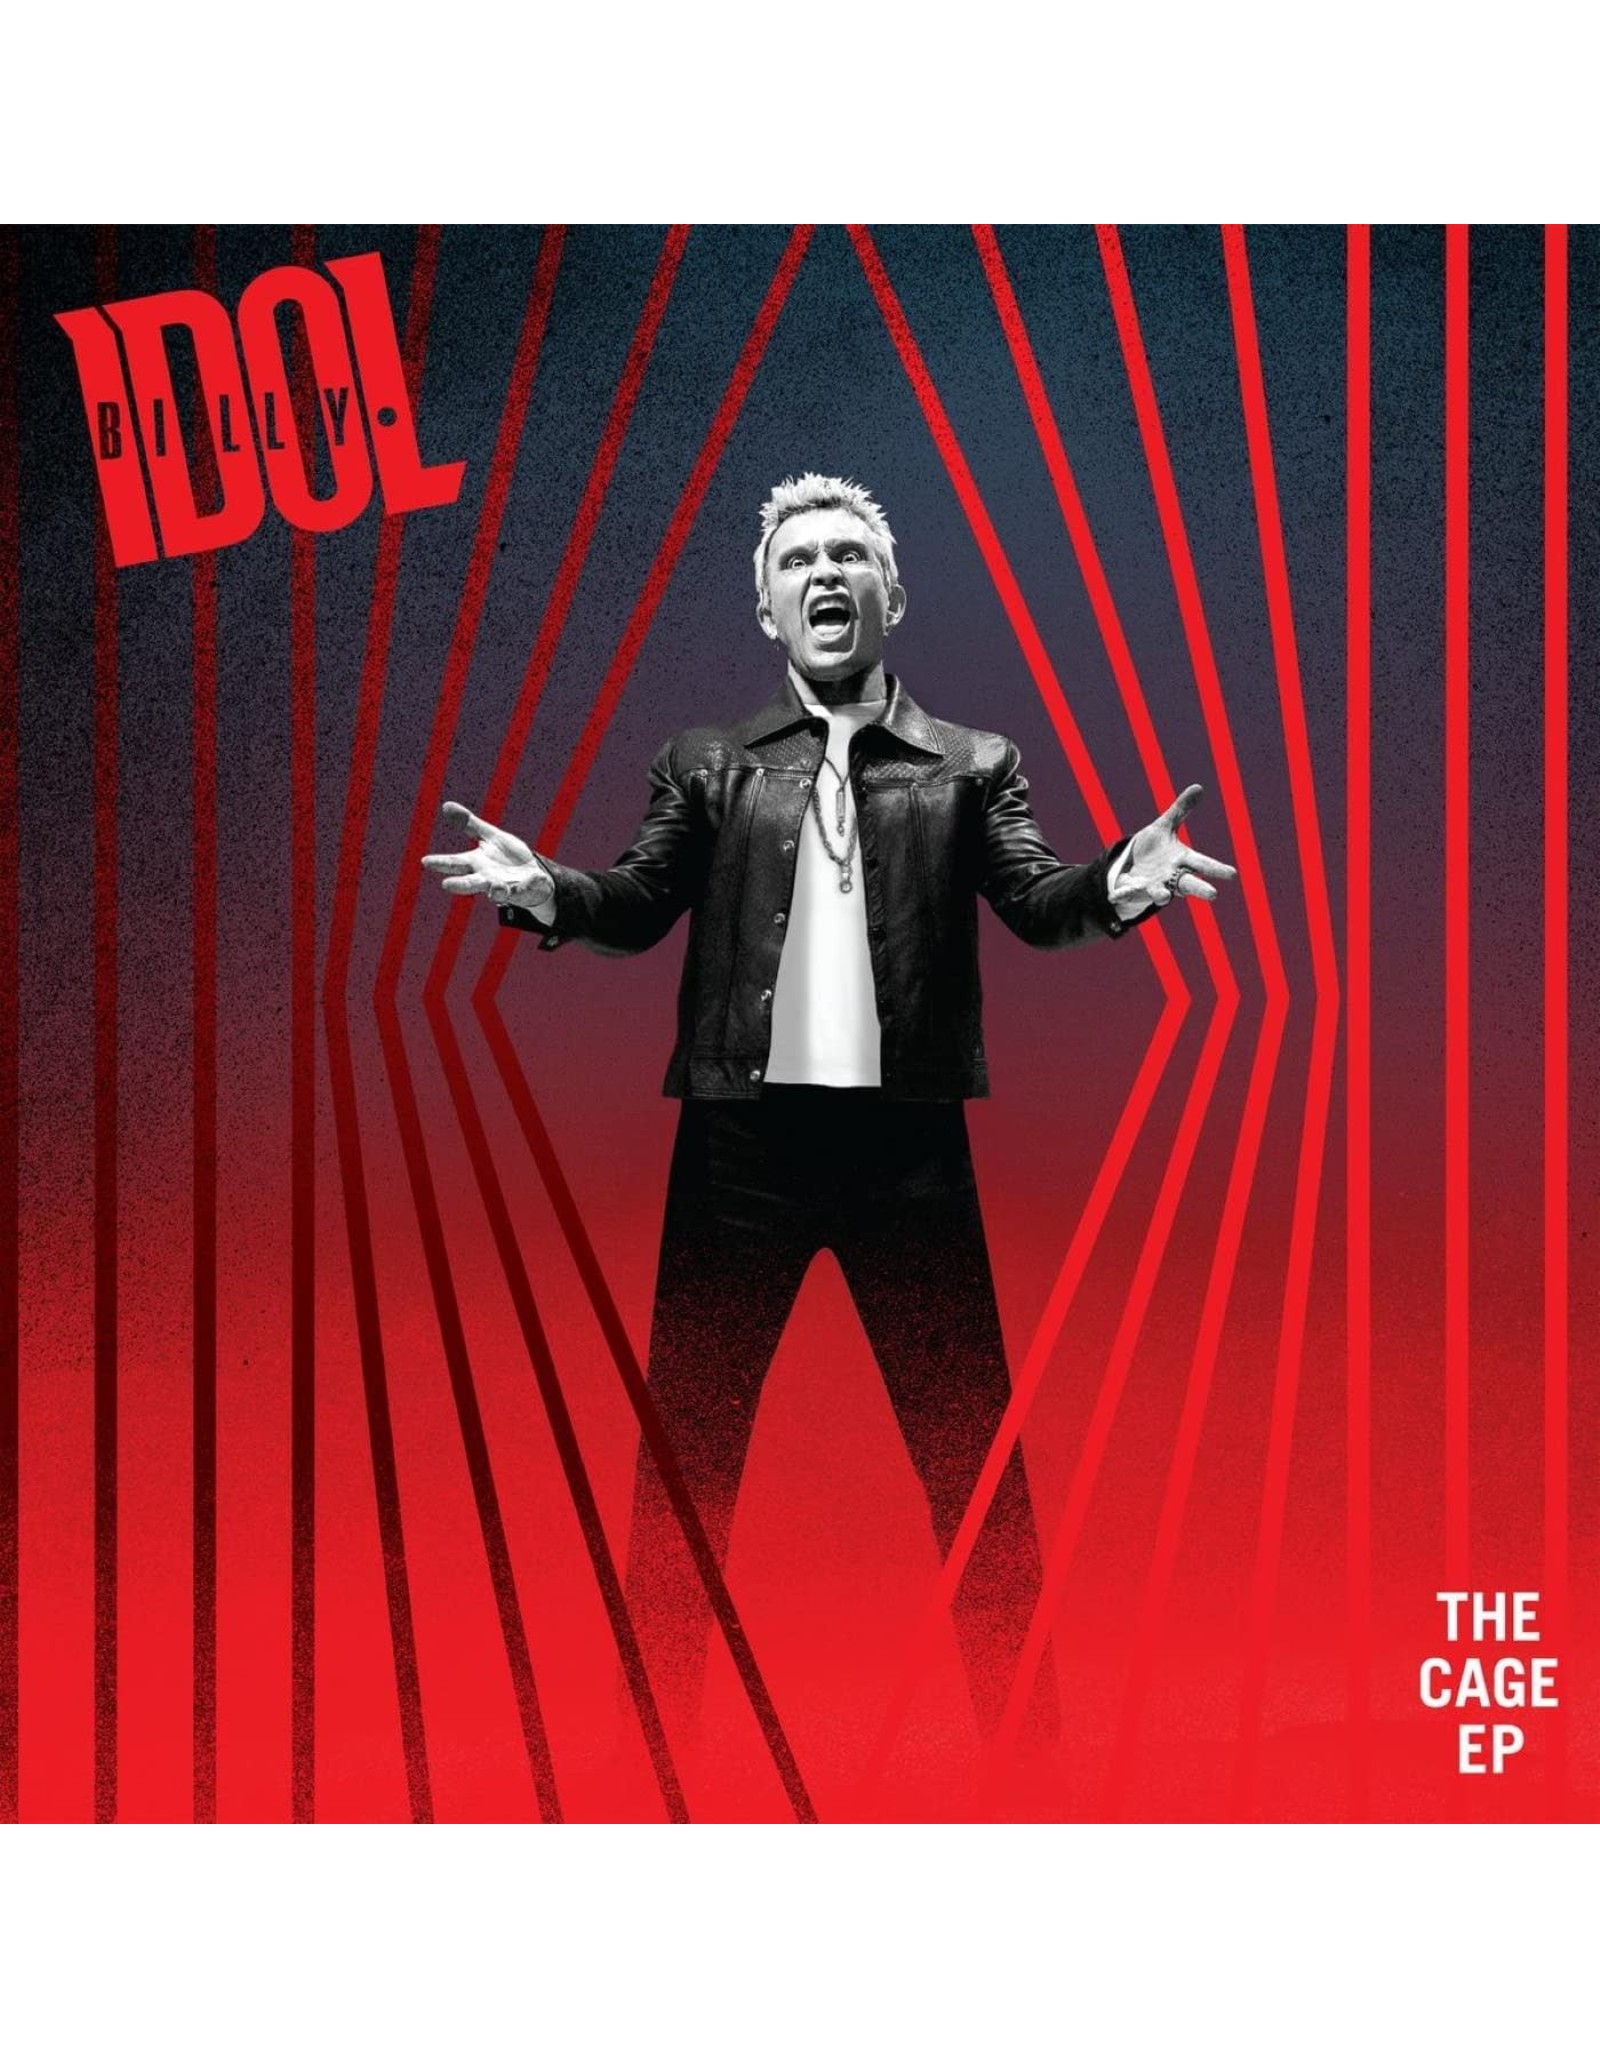 Billy Idol - The Cage EP (Exclusive Red Vinyl)